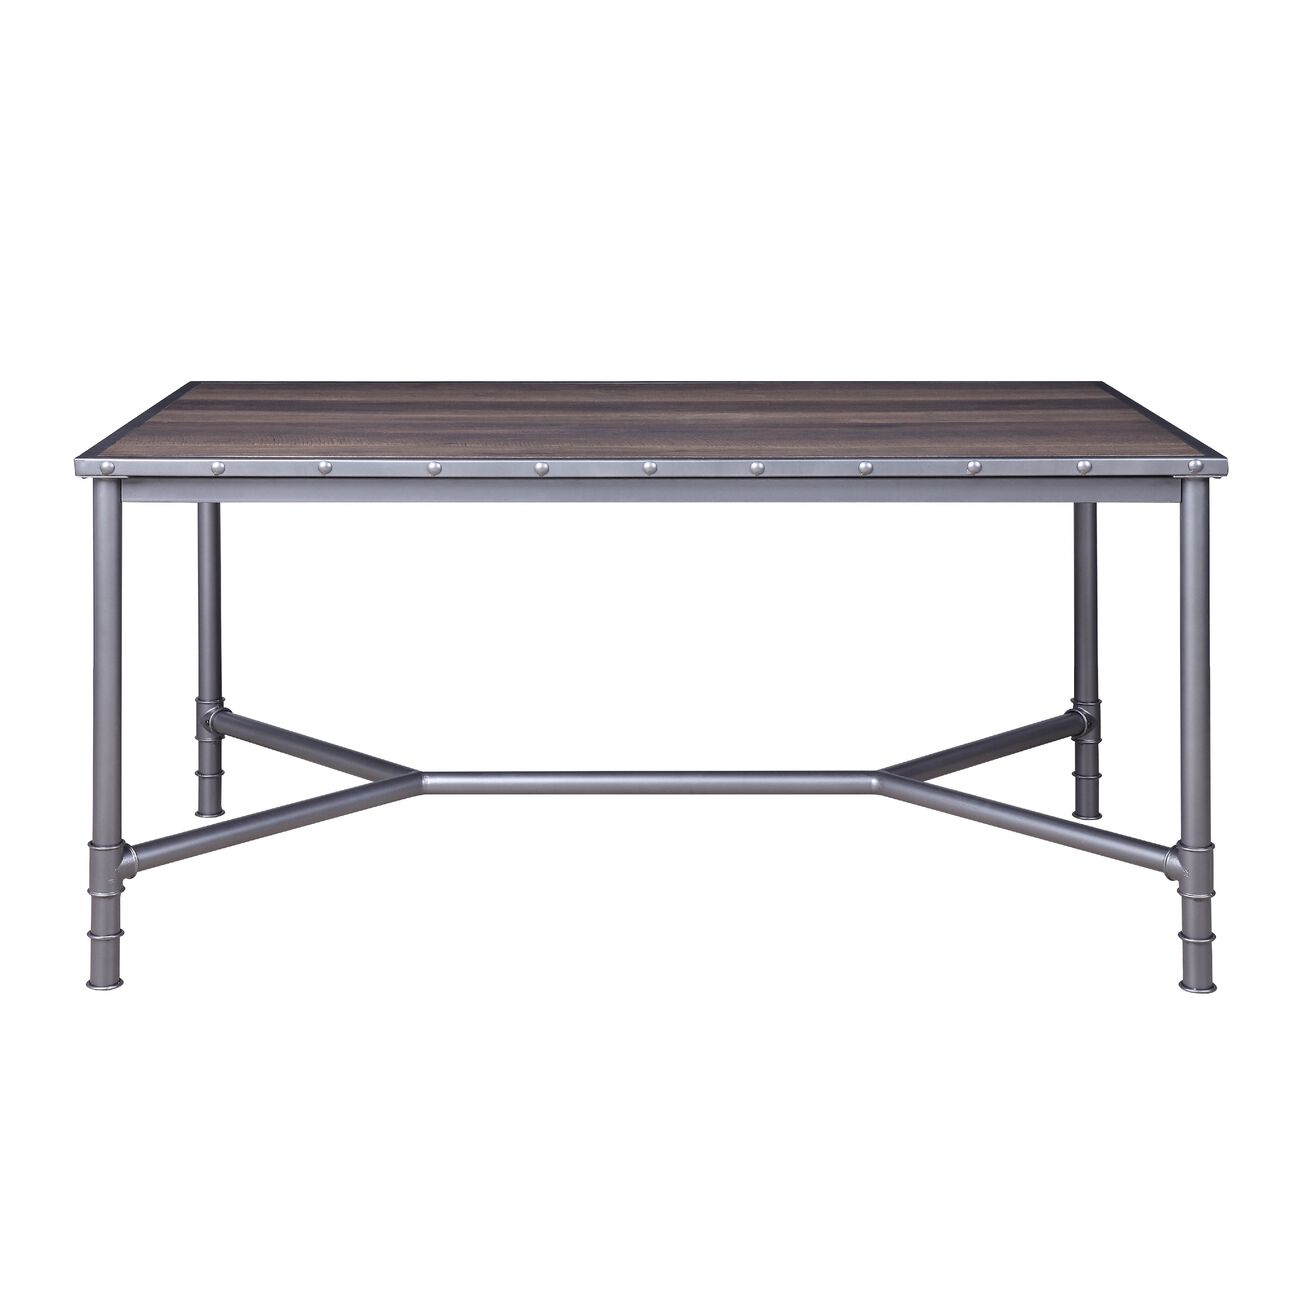 Pipe Design Base Industrial Dining Table with Studded Nails,Gray and Brown - BM215334